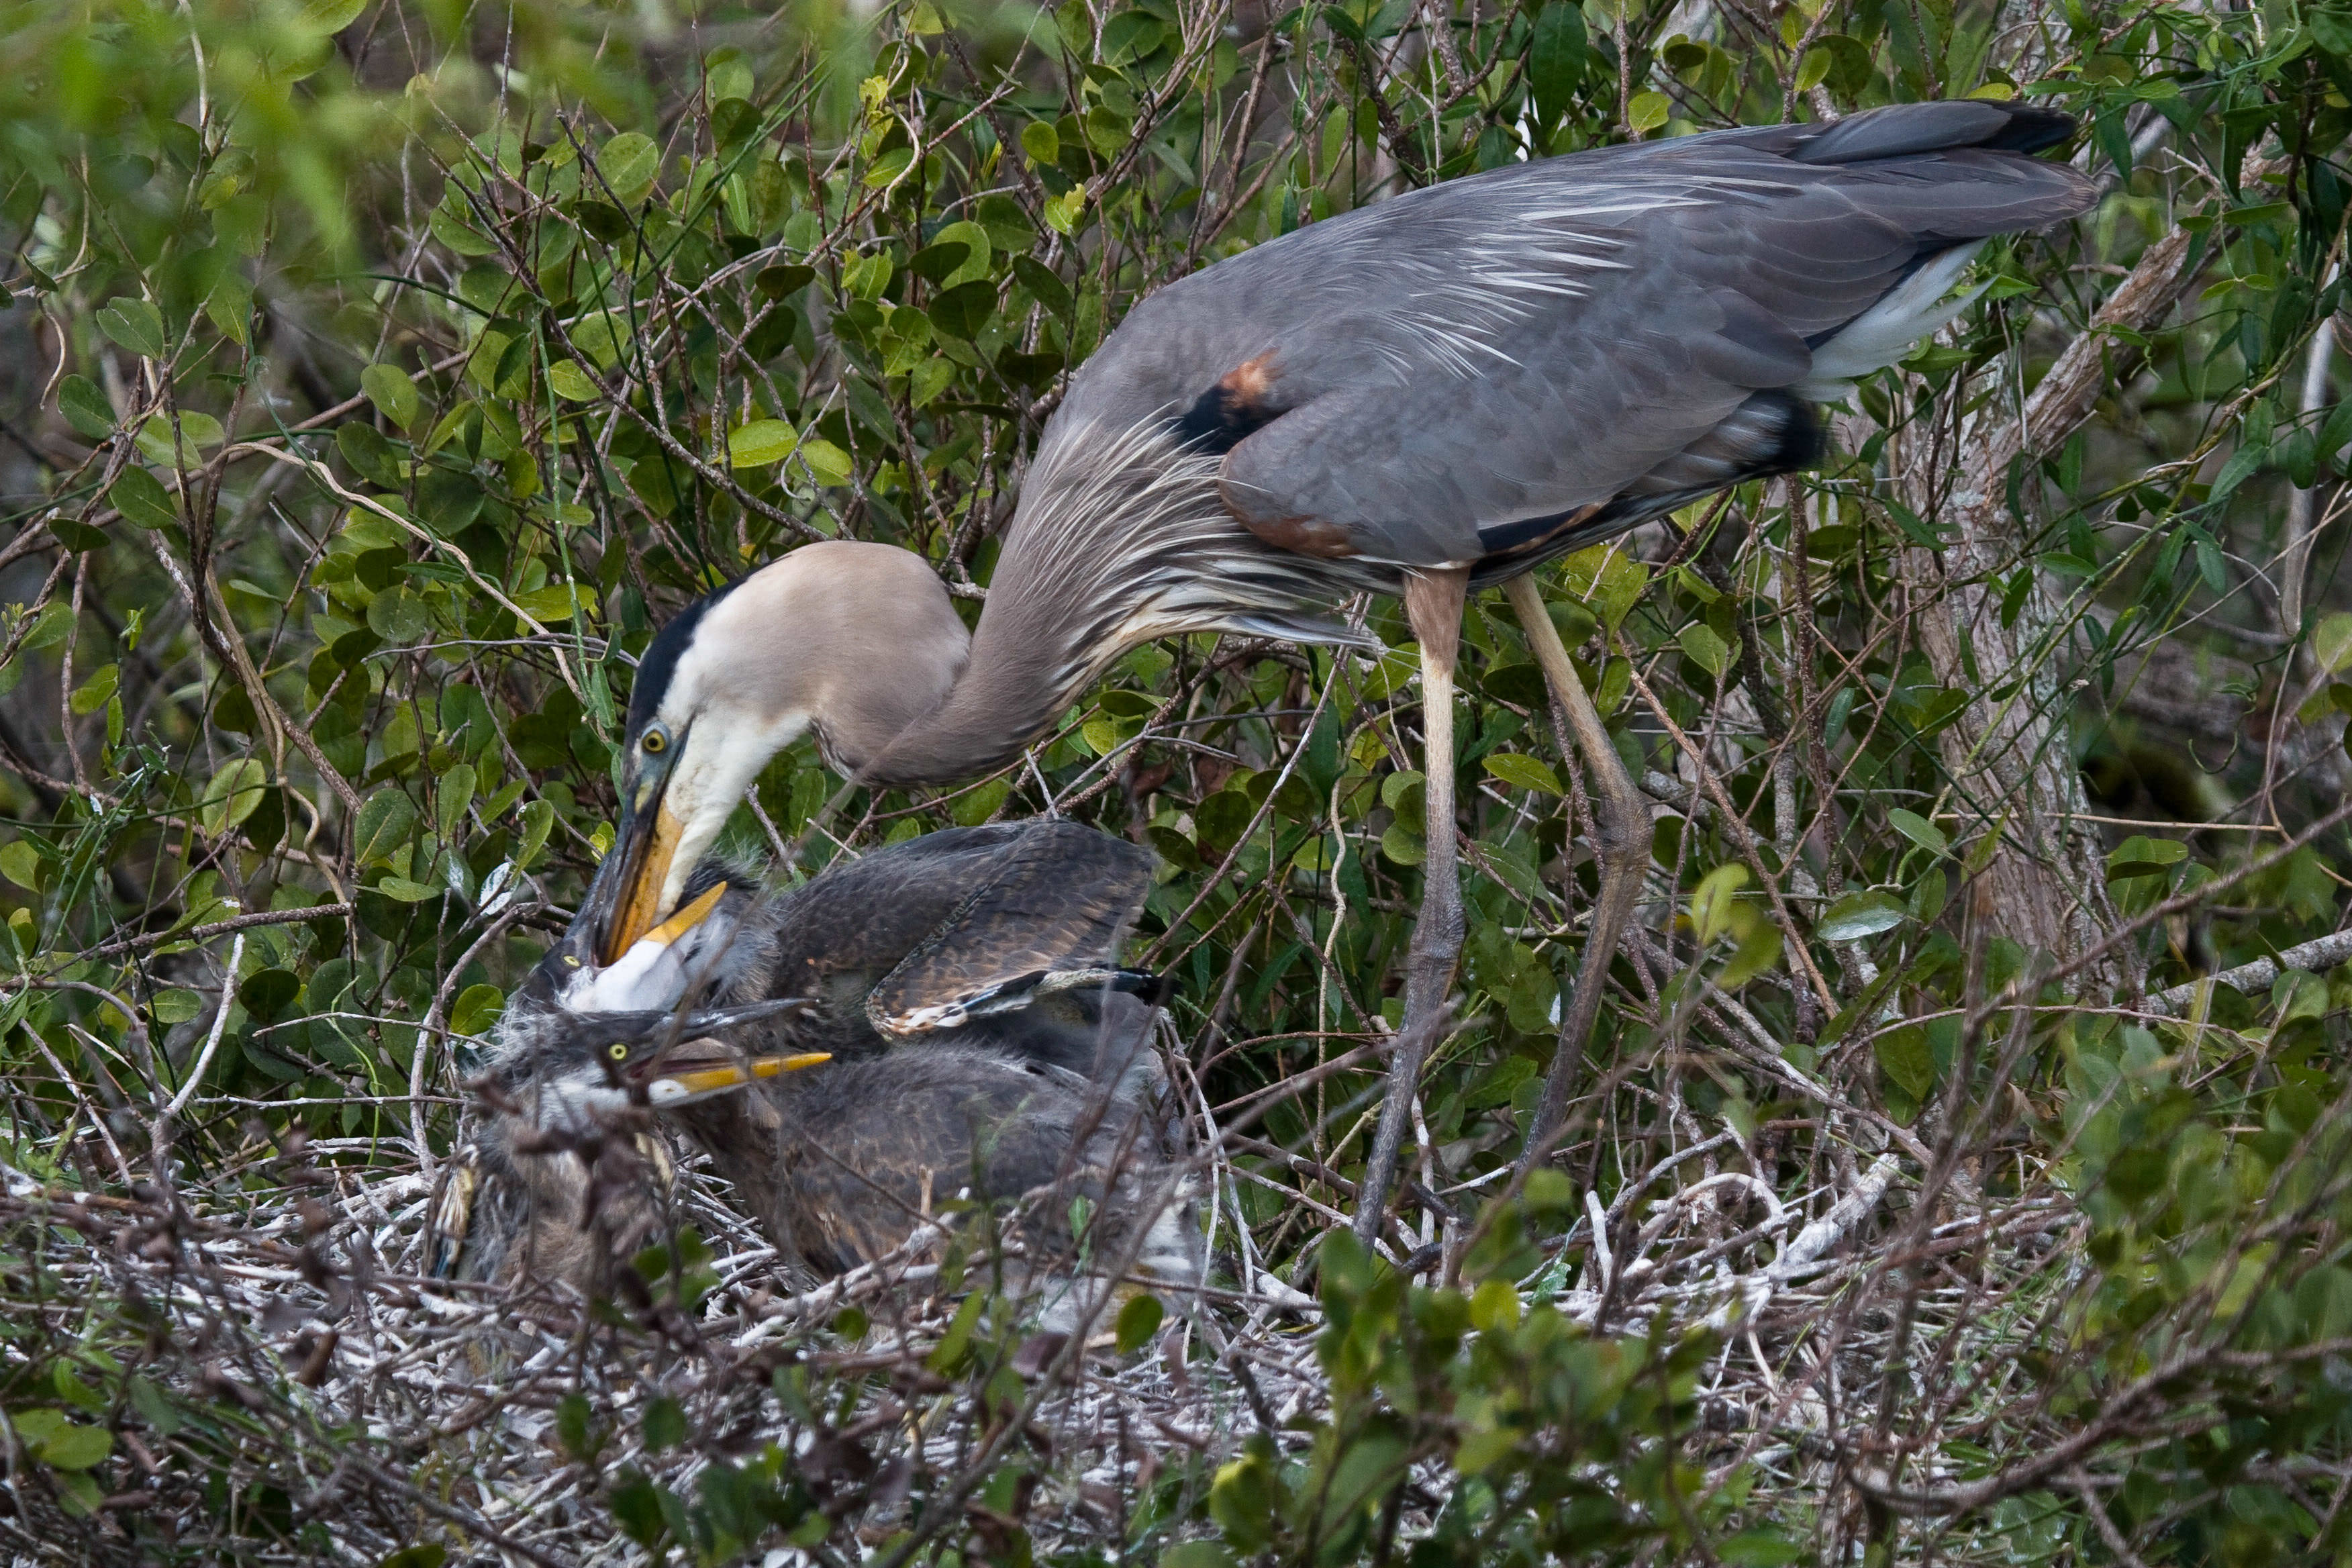 A blue heron bends down to her nest to feed her two chicks who wait with open beaks.